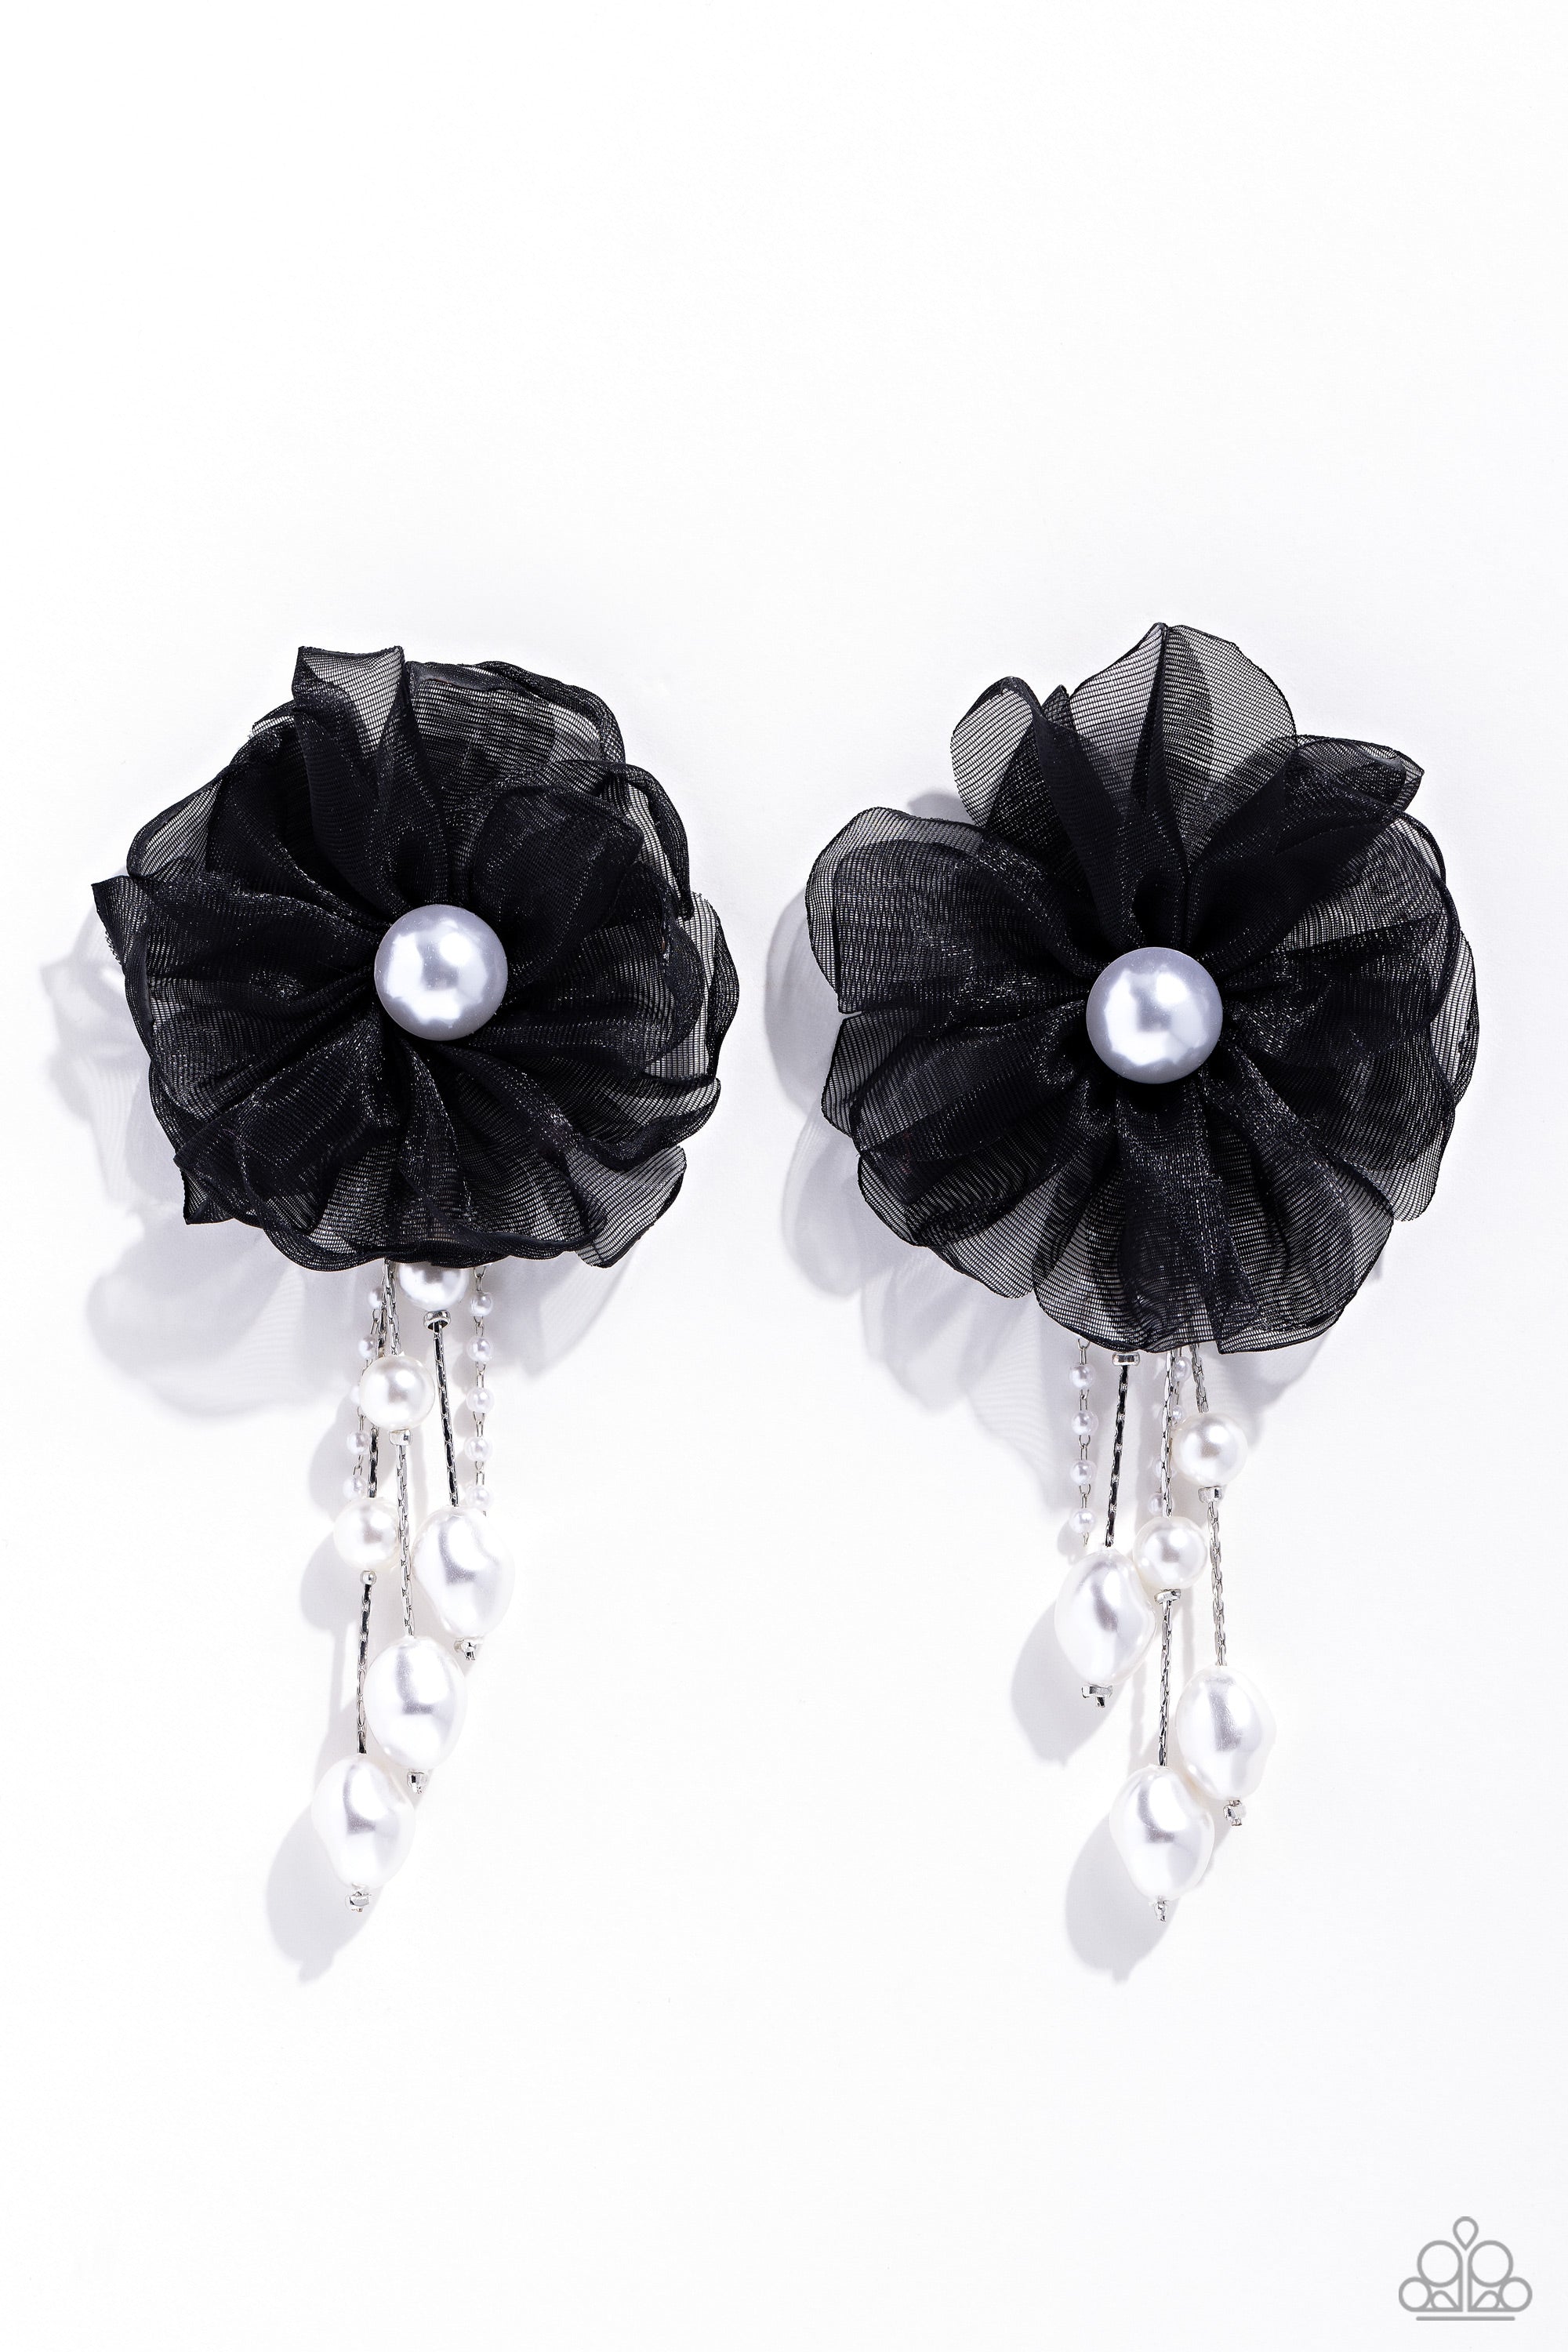 Dipping in Decadence Black Silk & White Pearl Earrings - Paparazzi Accessories- lightbox - CarasShop.com - $5 Jewelry by Cara Jewels